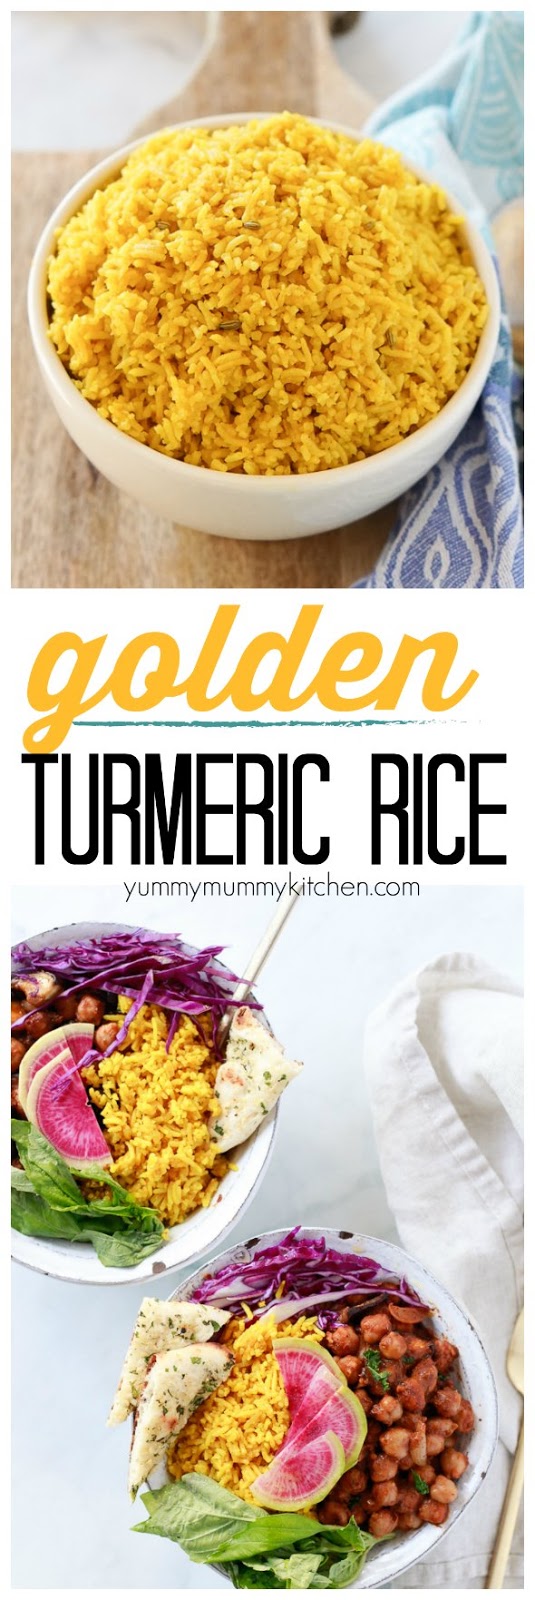 Spiced Indian turmeric rice is so easy in the Instant Pot pressure cooker or rice cooker. Golden turmeric rice is perfect with Buddha bowls and many other dishes. This recipe is naturally vegan and gluten free. 